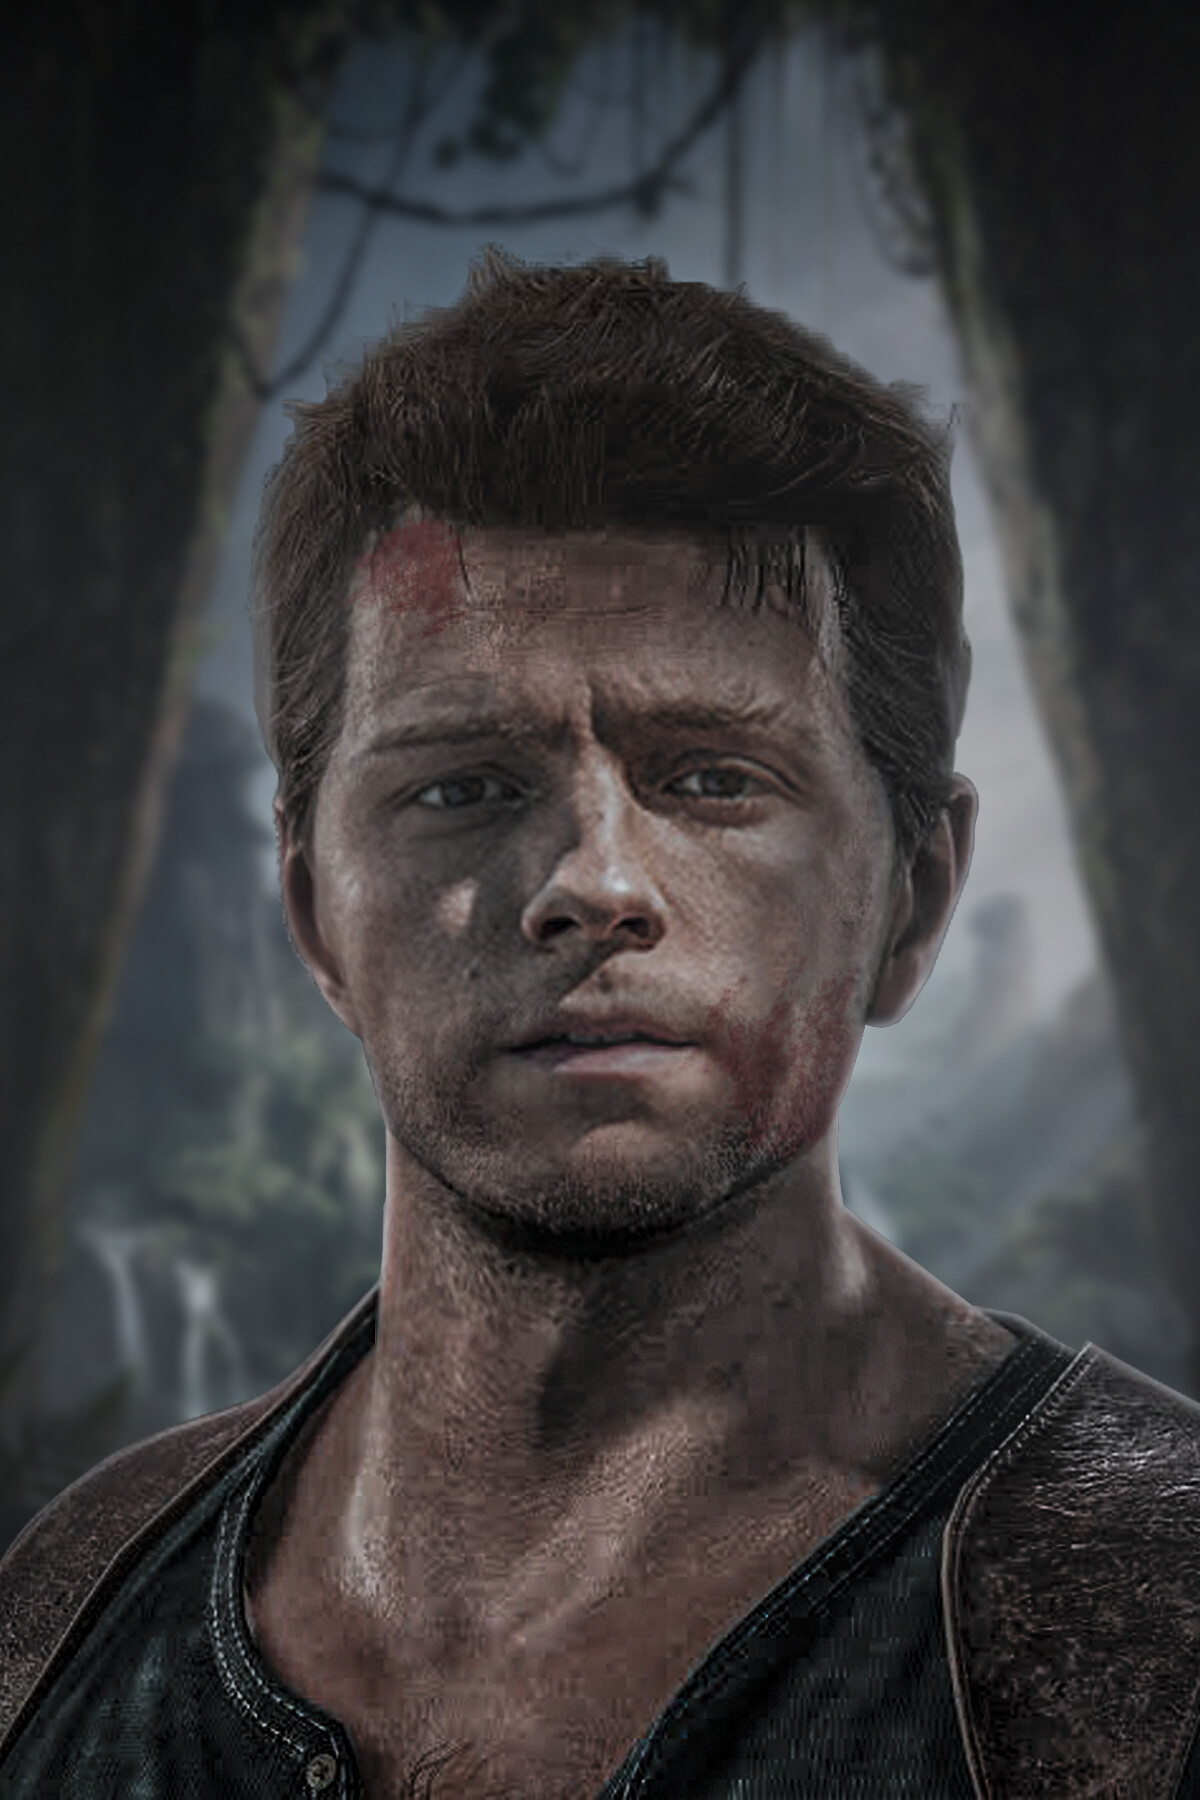 Uncharted Star Tom Holland Shows Off His New Nathan Drake Look